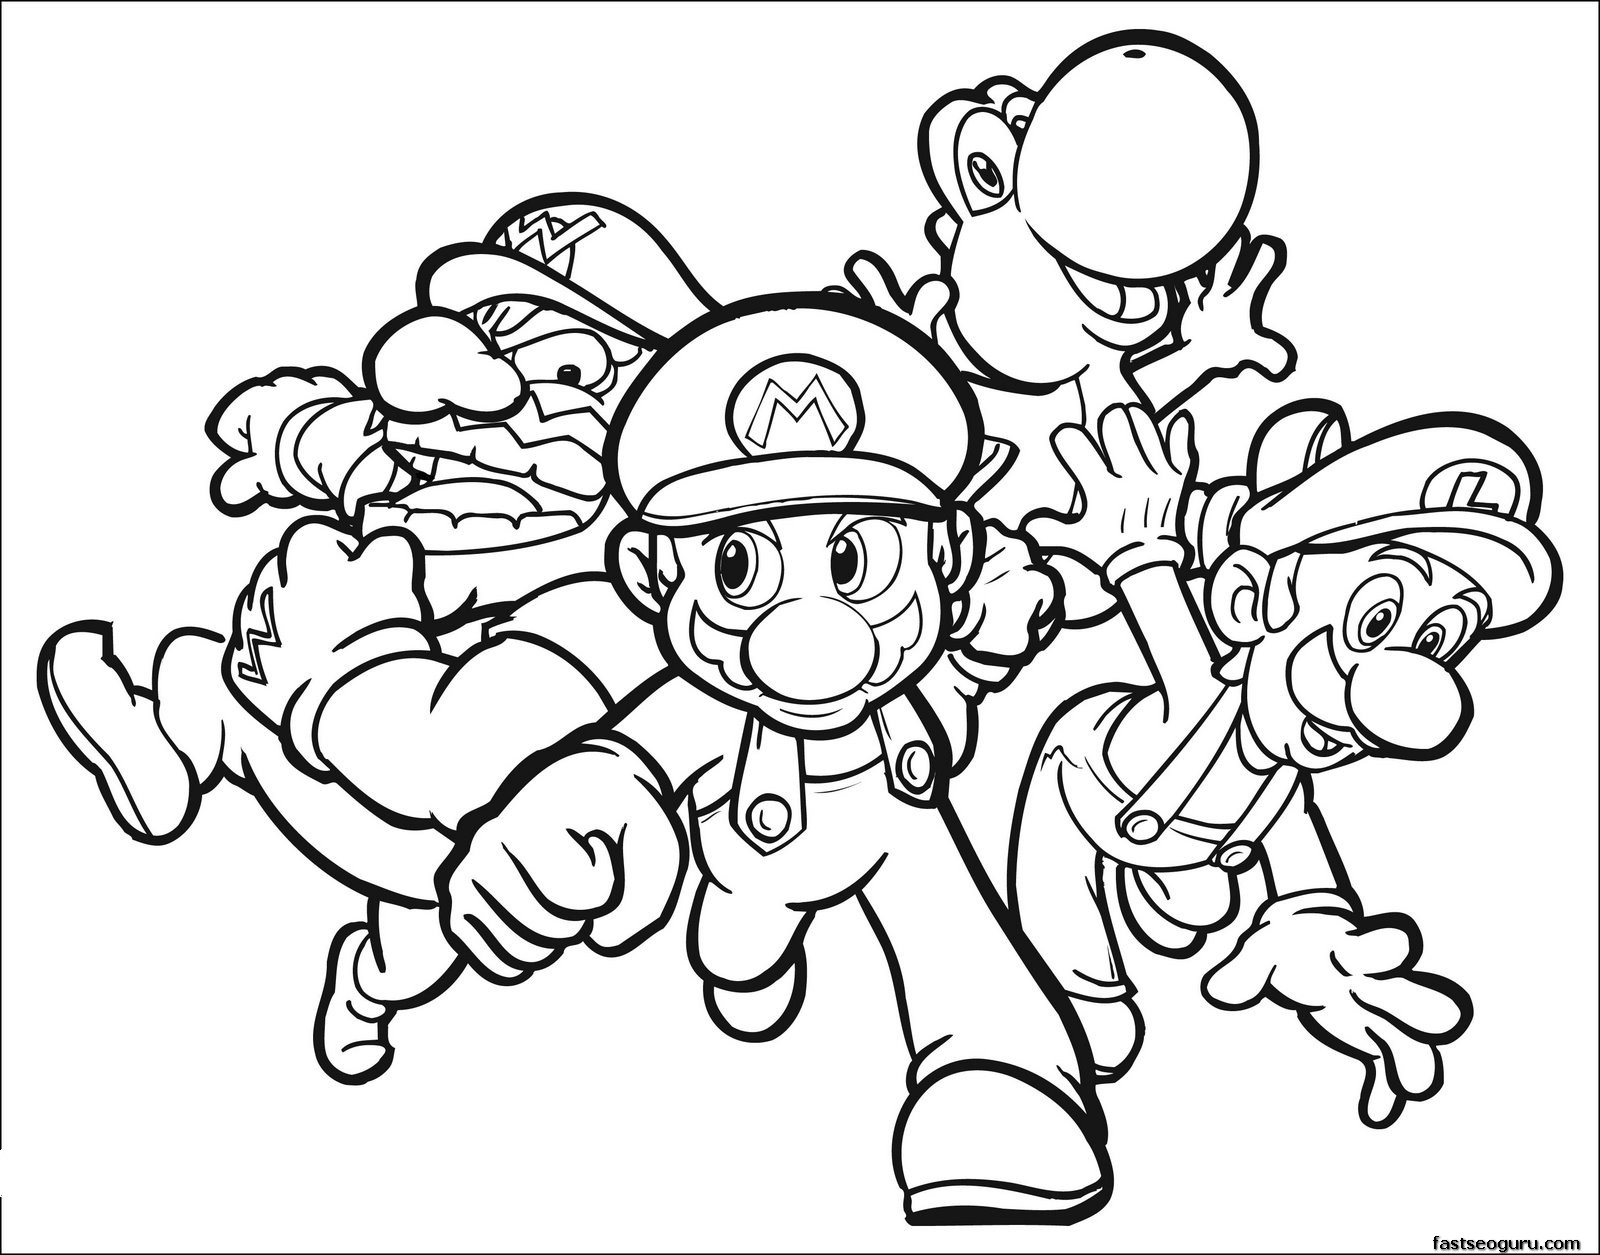 Printable Coloring Pages (14) - Coloring Kids